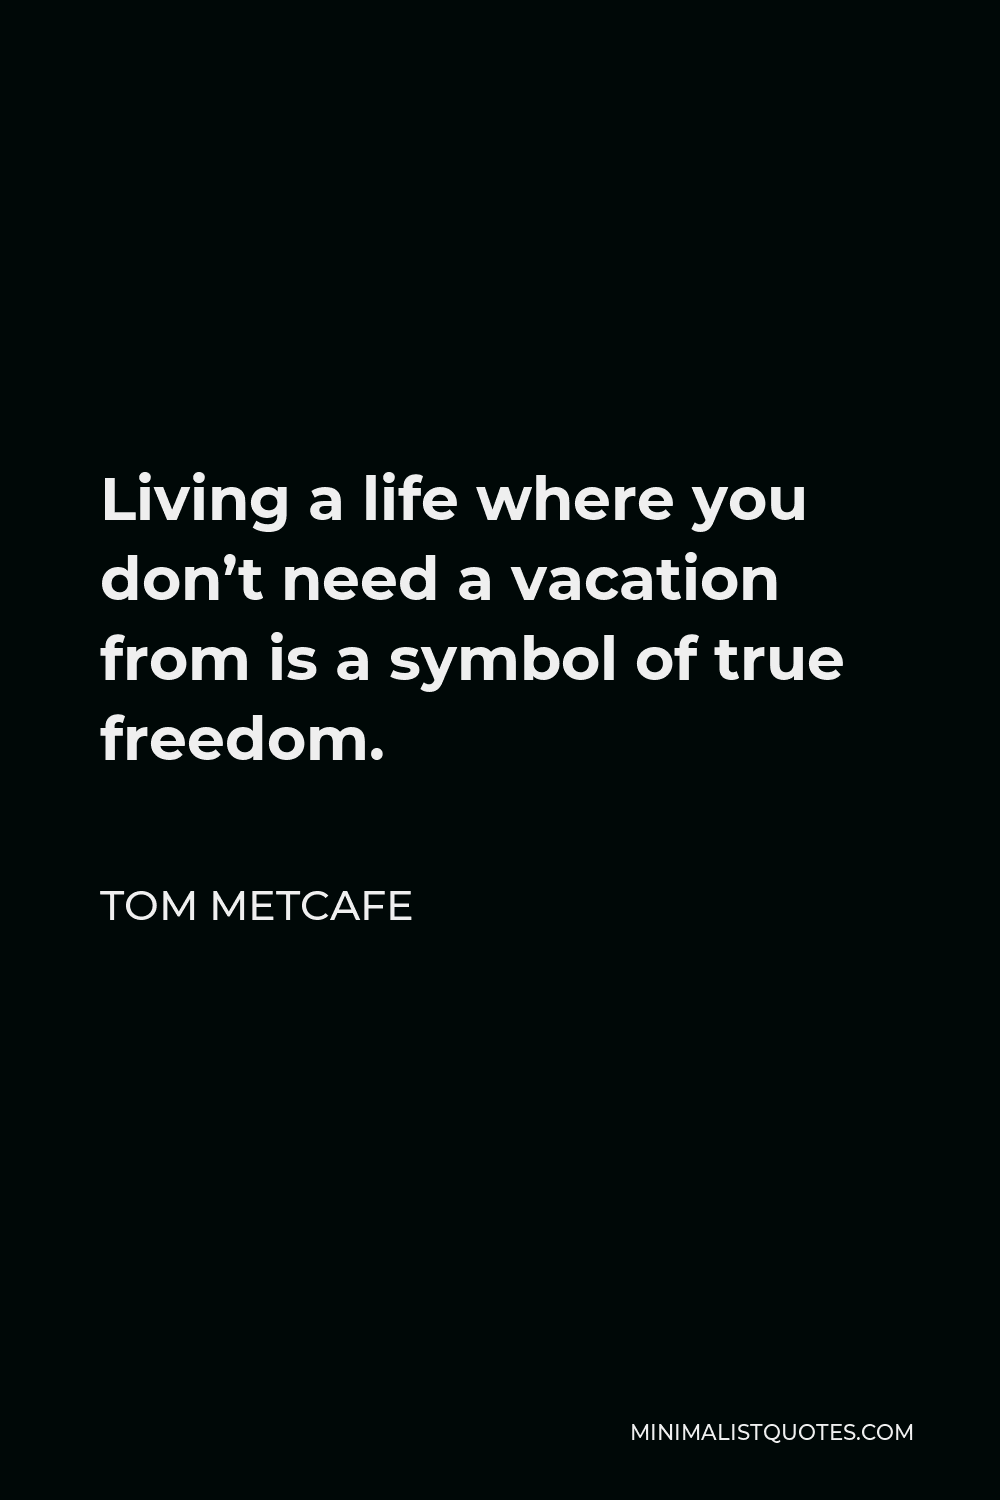 Tom Metcafe Quote - Living a life where you don’t need a vacation from is a symbol of true freedom.